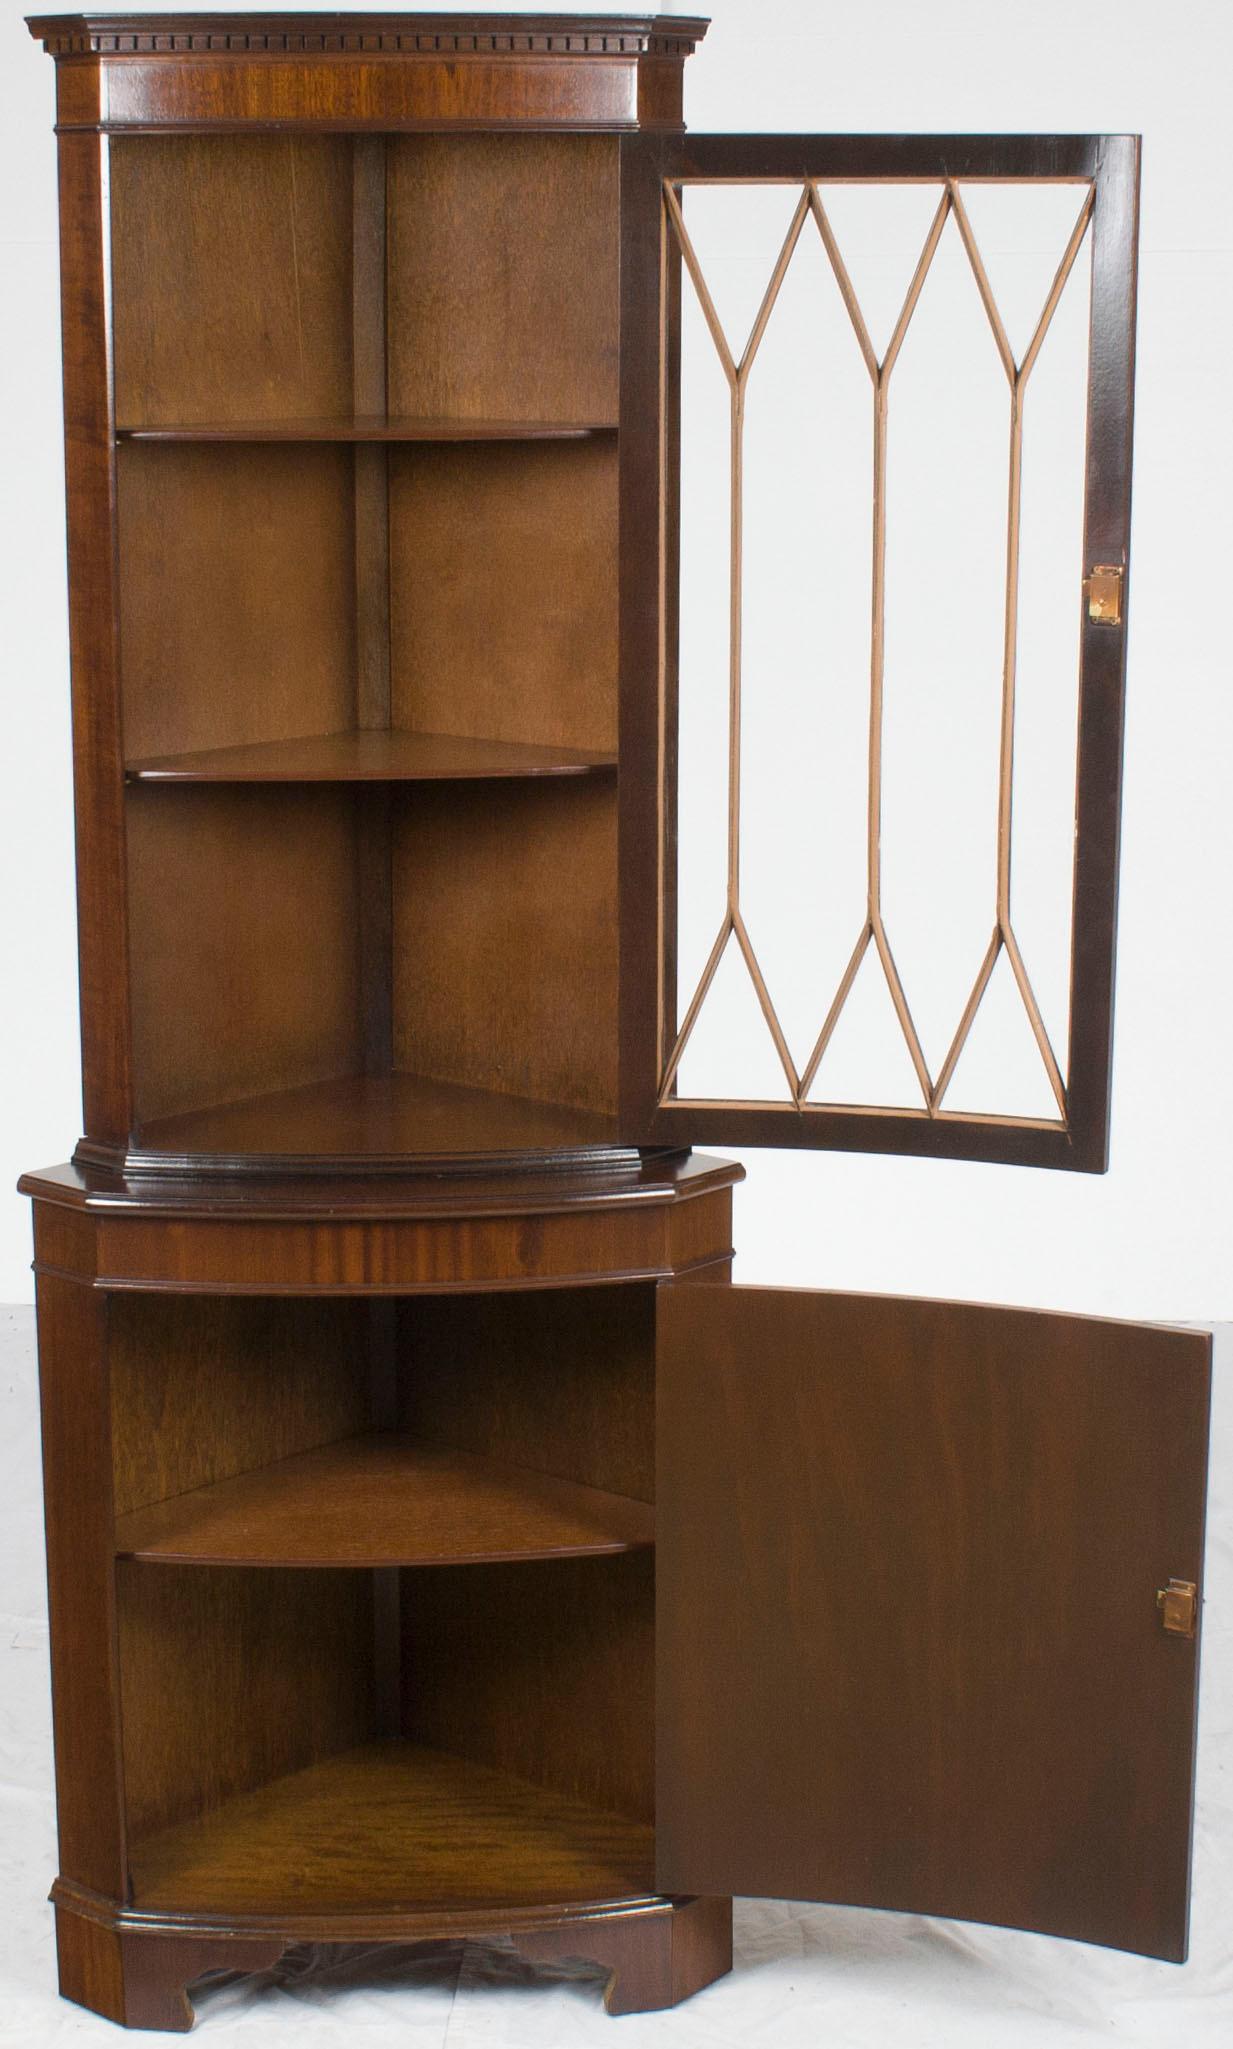 This elegant bow front corner cabinet was crafted in England around the year 1960. Today it remains as lovely as ever, with rich mahogany, bracket feet, and beautifully adorned locking doors.

The bow front corner cabinet is such a lovely design